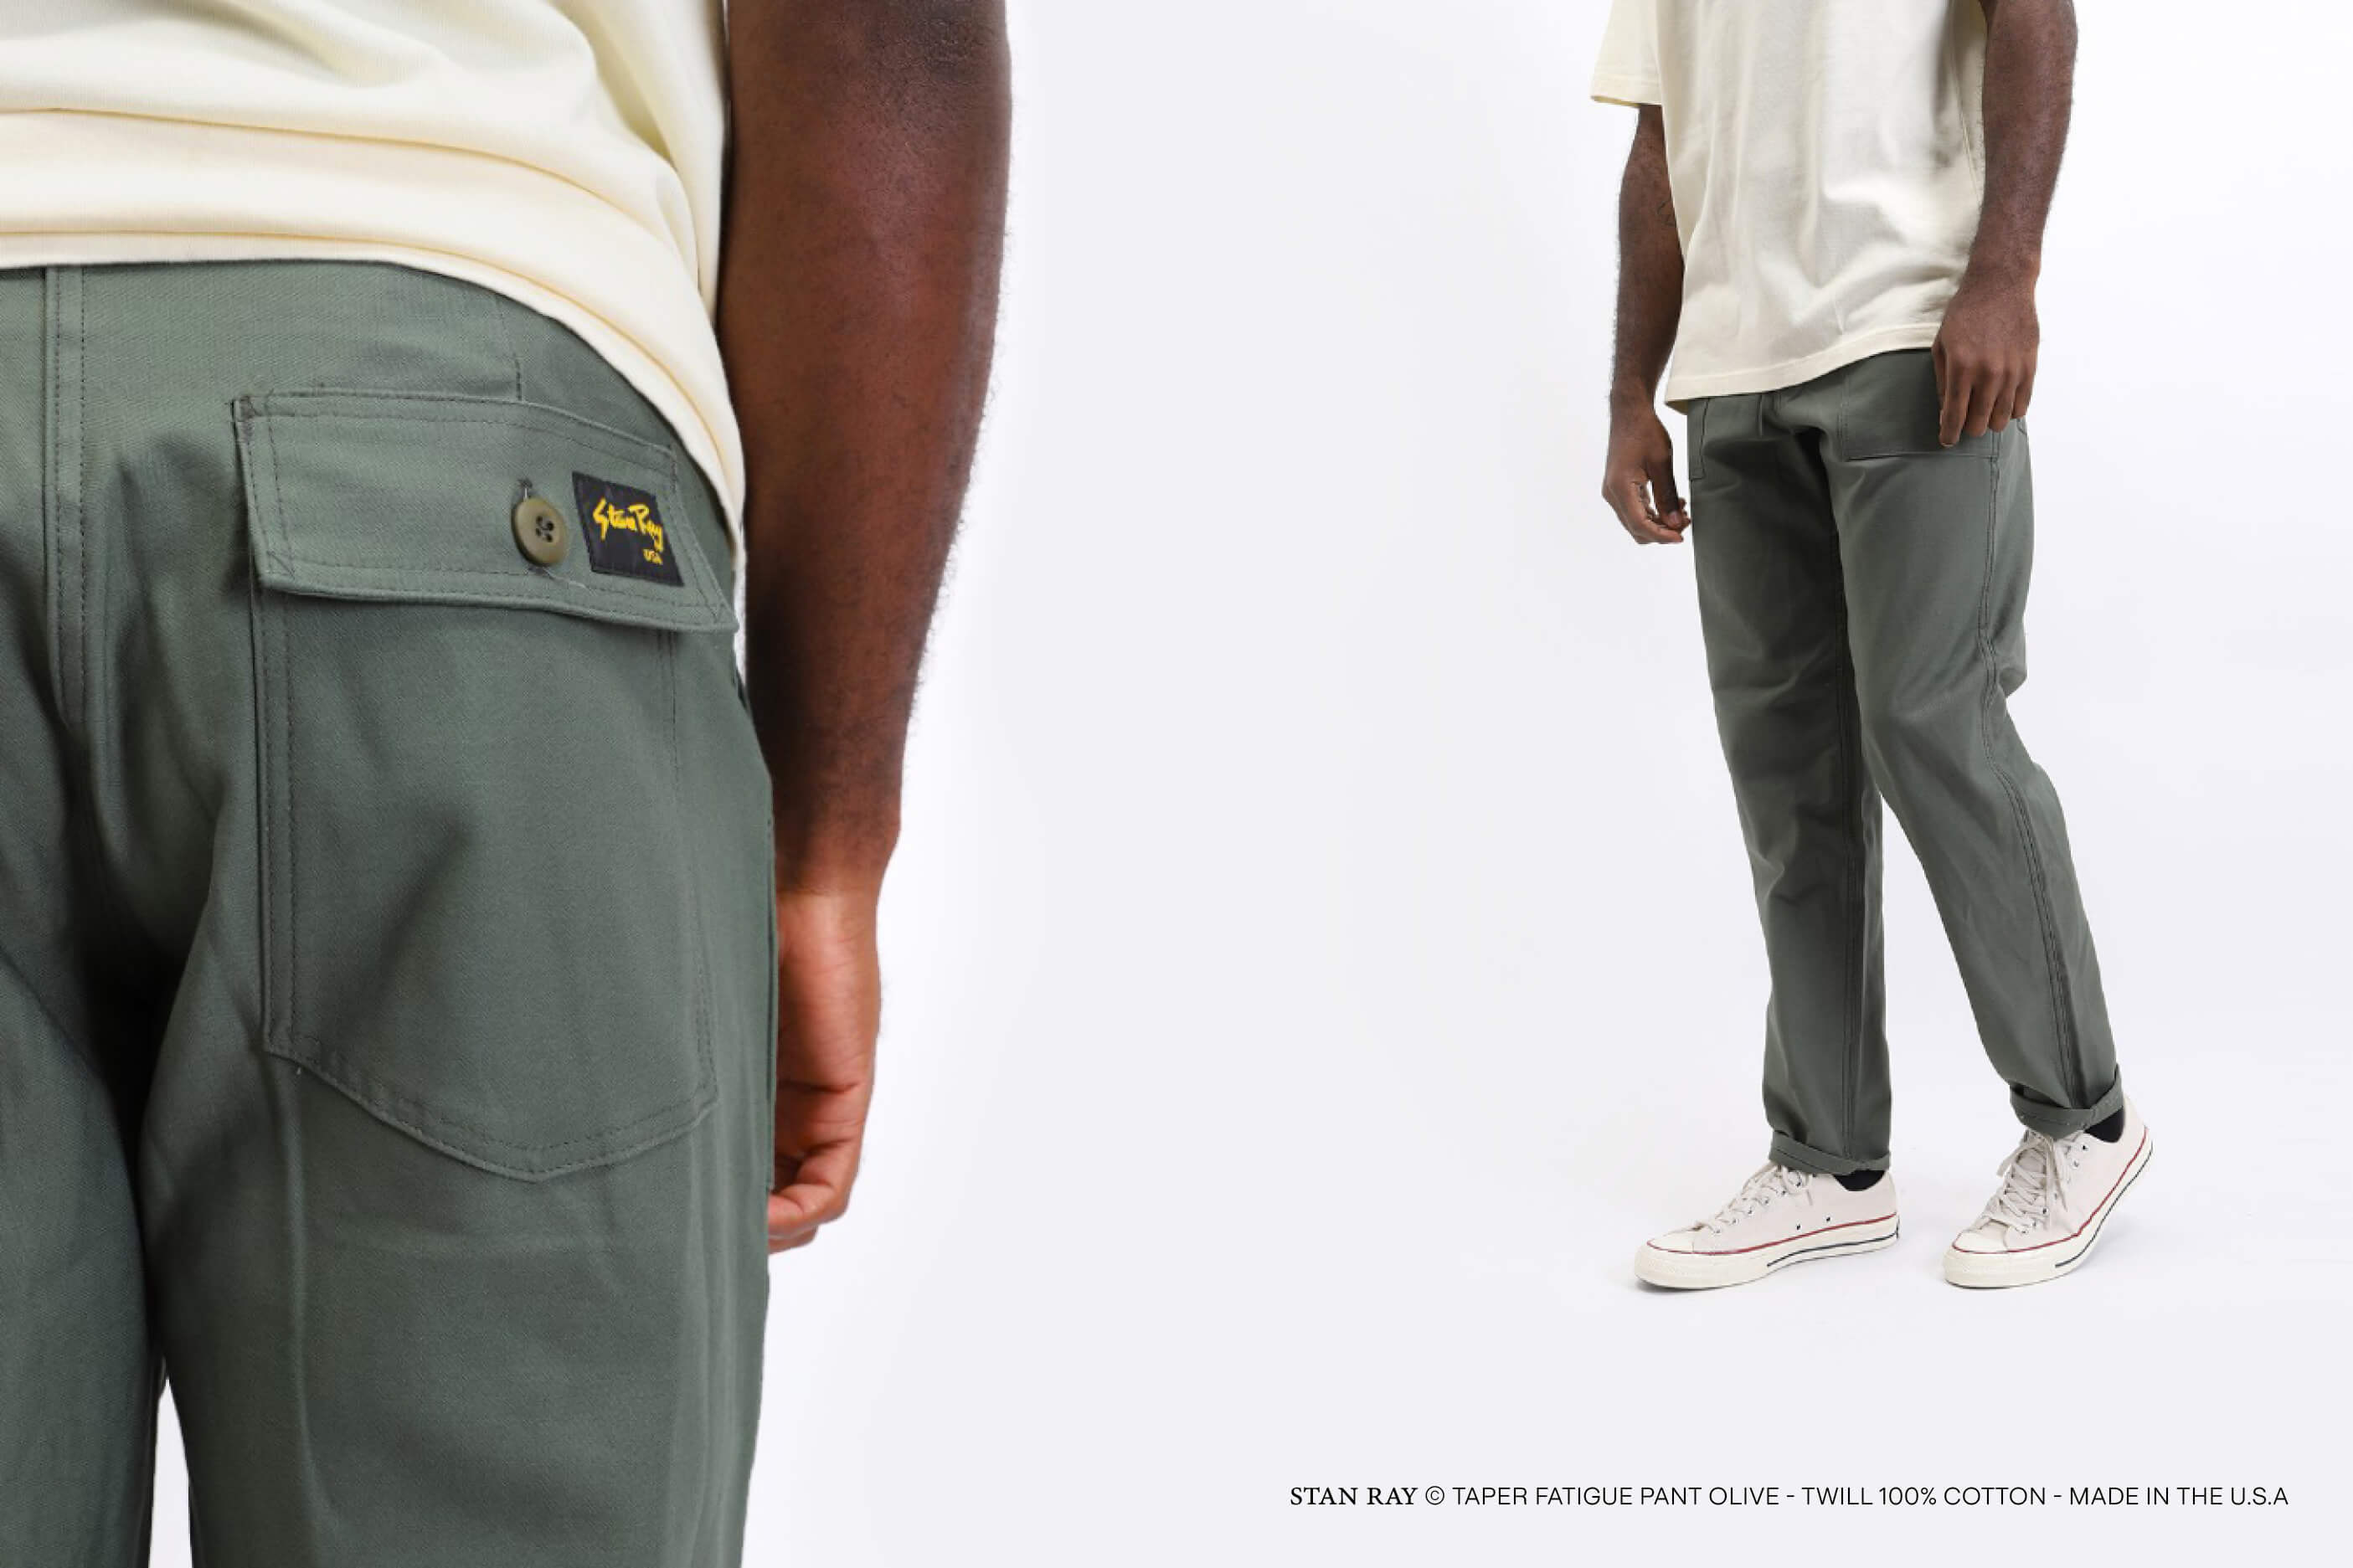 Stan Ray the fatigue pants made in usa.